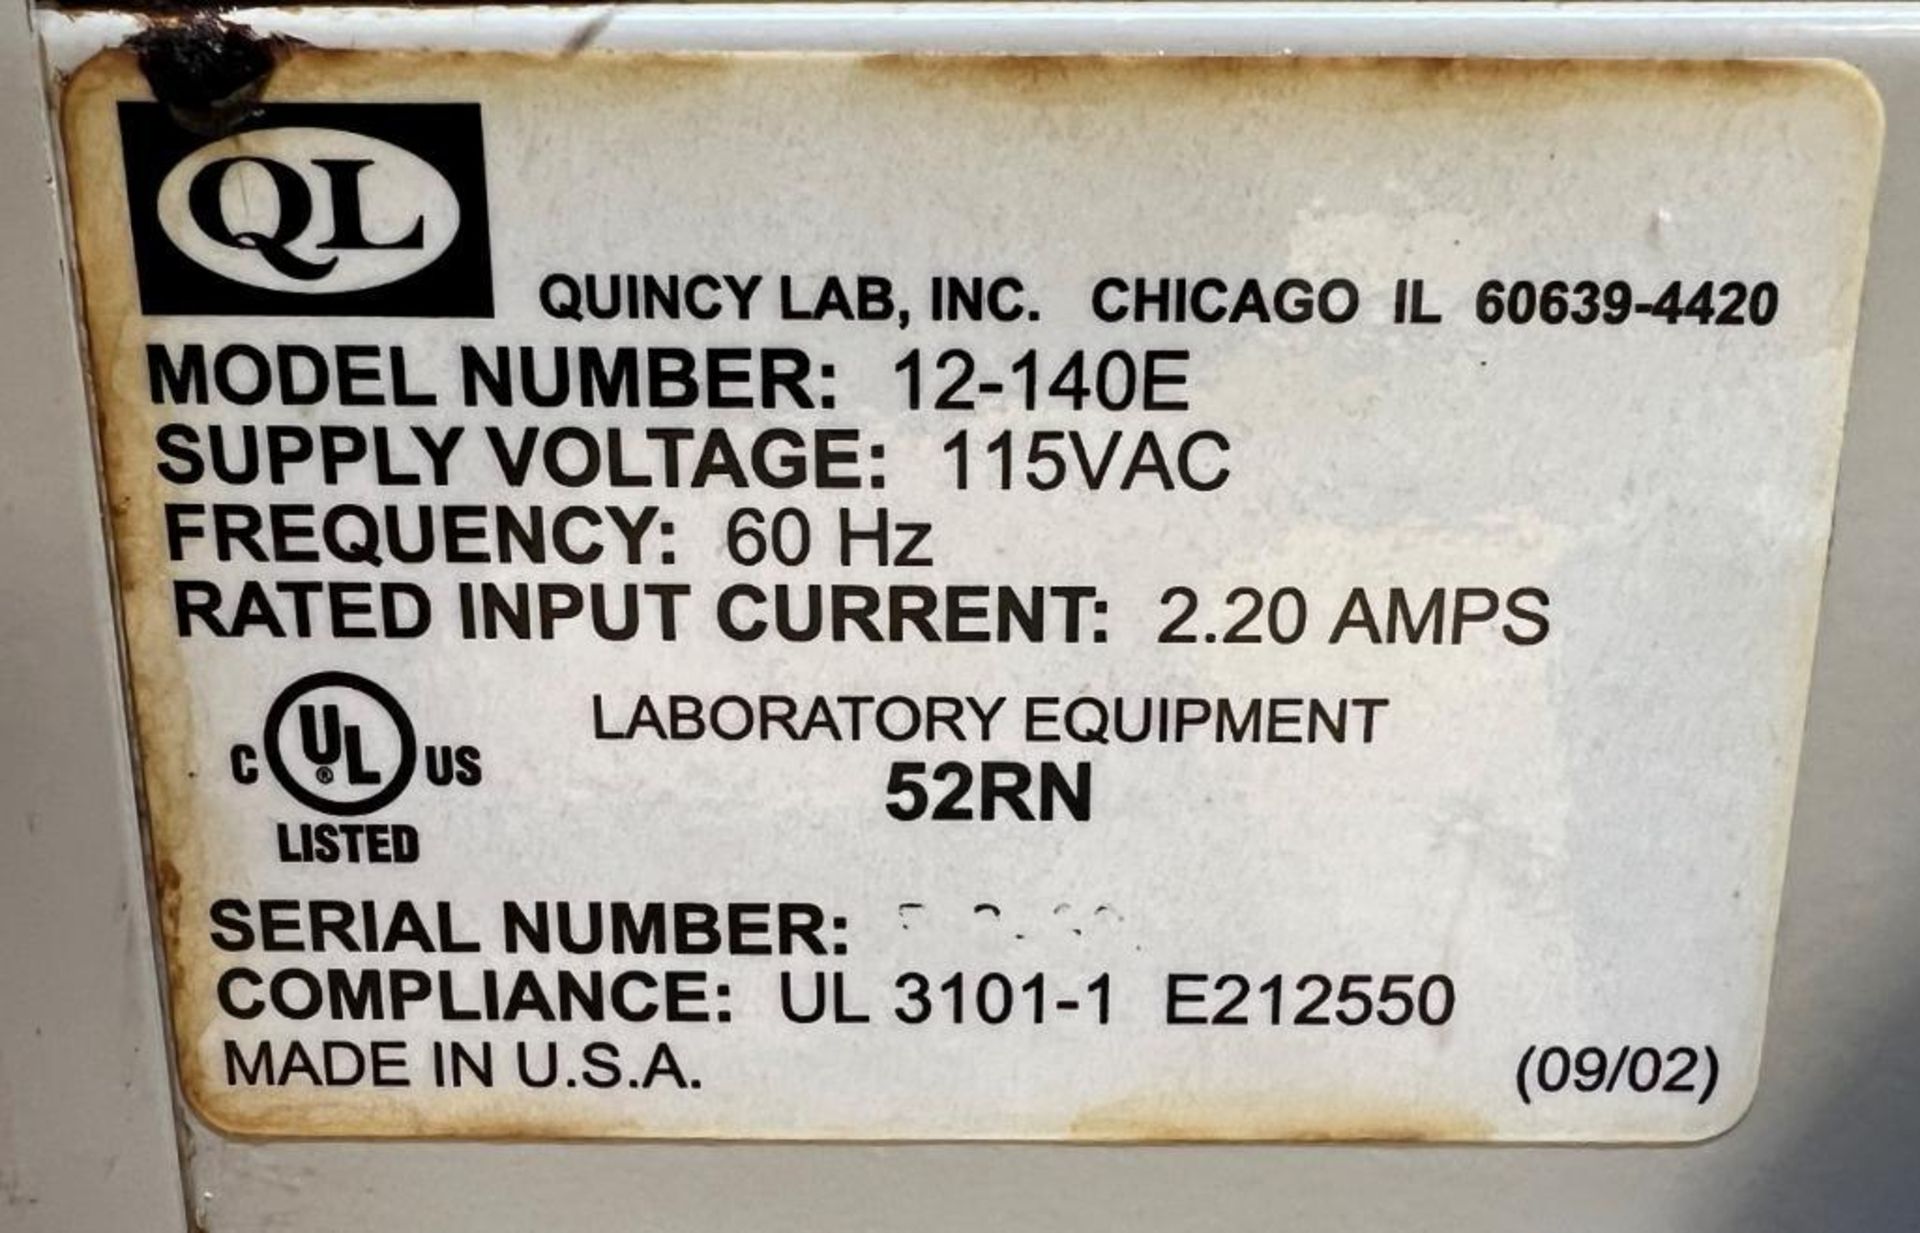 Quincy Lab Bench Top Incubator, Model 12-140E. - Image 6 of 6